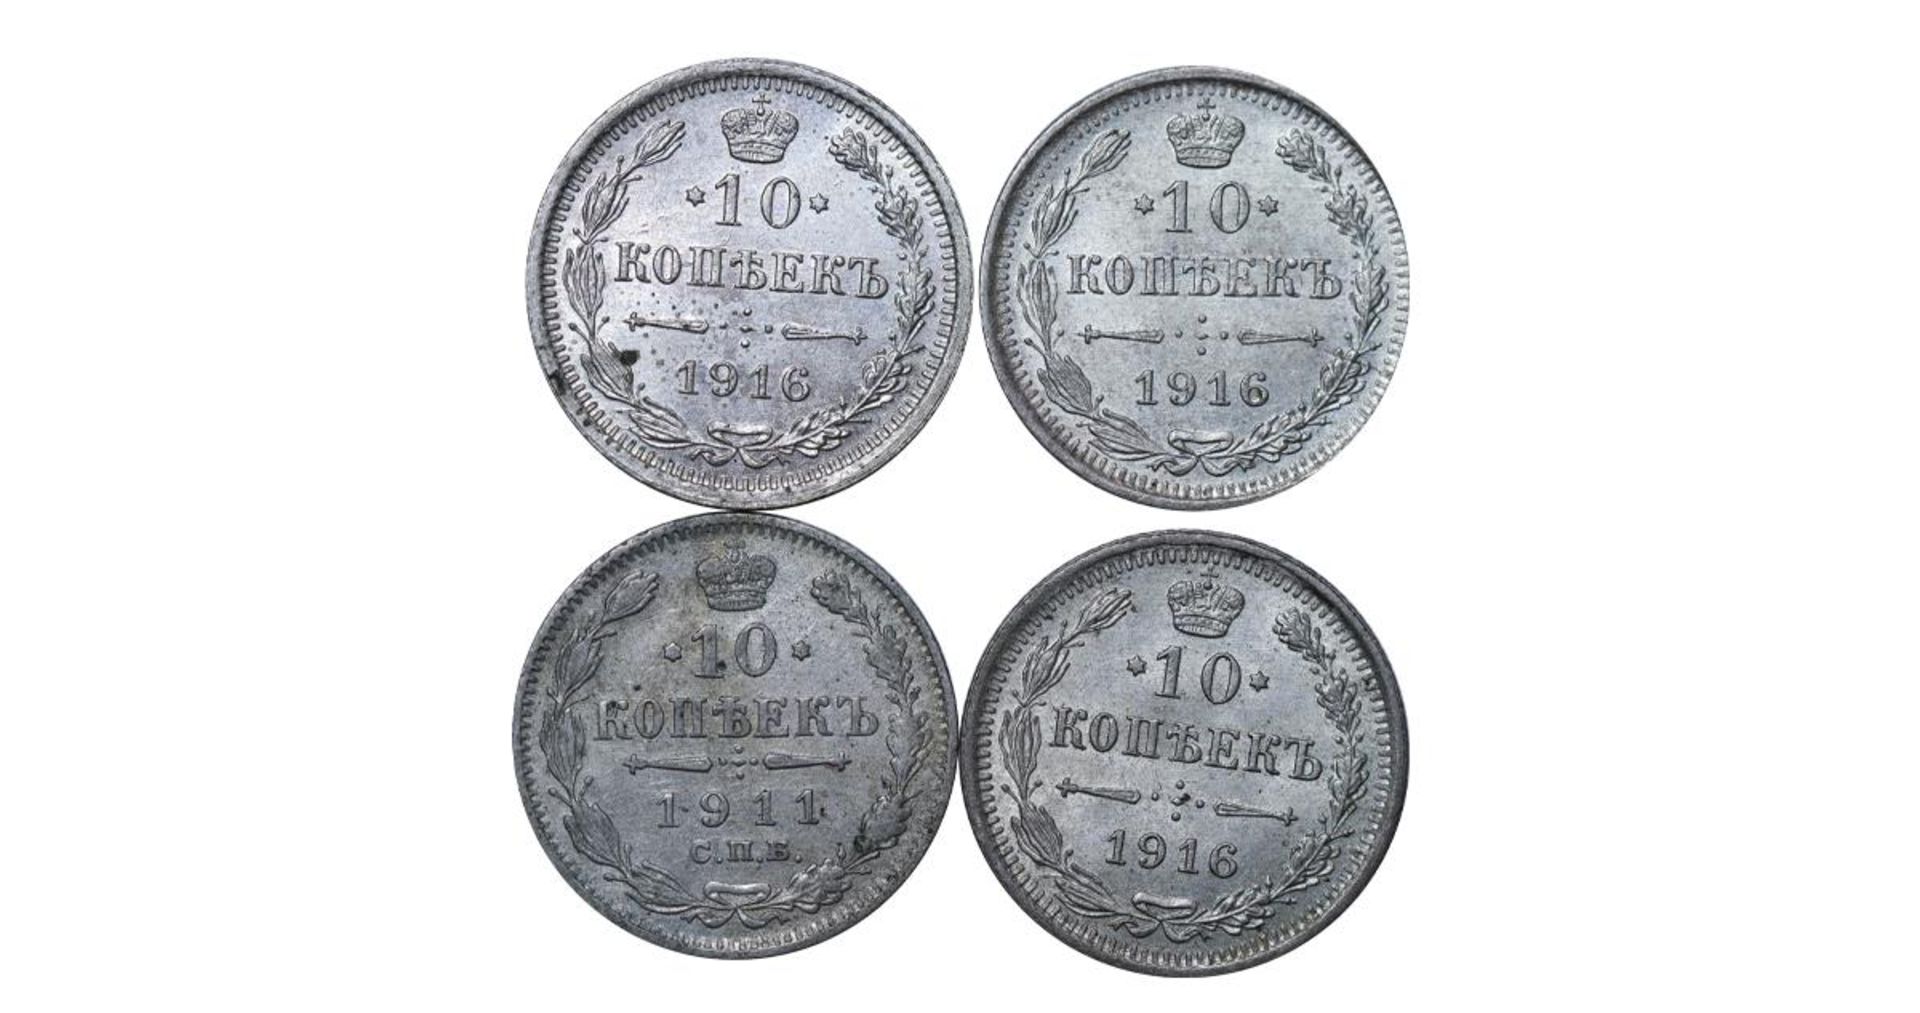 Collection of 4 coins: Russian Empire, 10 Kopecks, 1911 year, SPB-EB, 1916 year, EB, 1916 year, EB, 